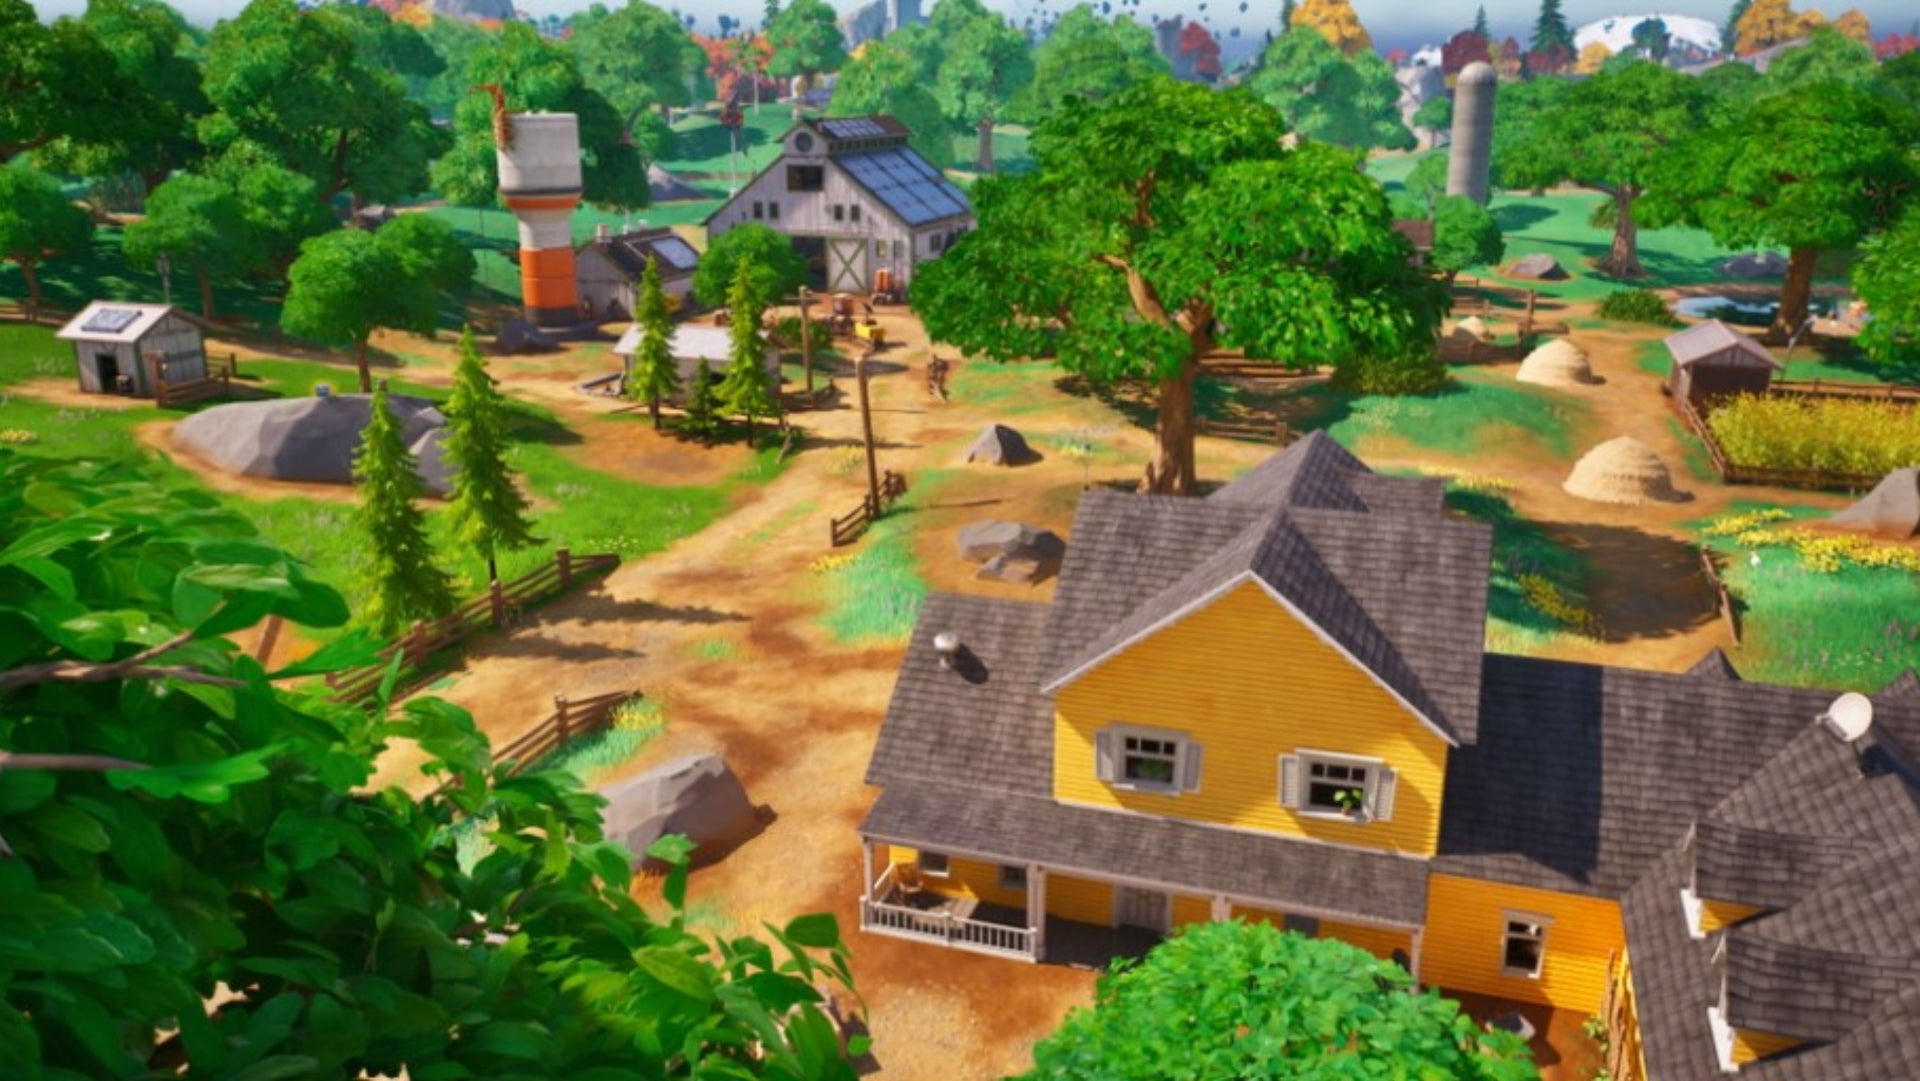 Fortnite, official Epic Games image of a P.O.I, a yellow house in Chapter Four.